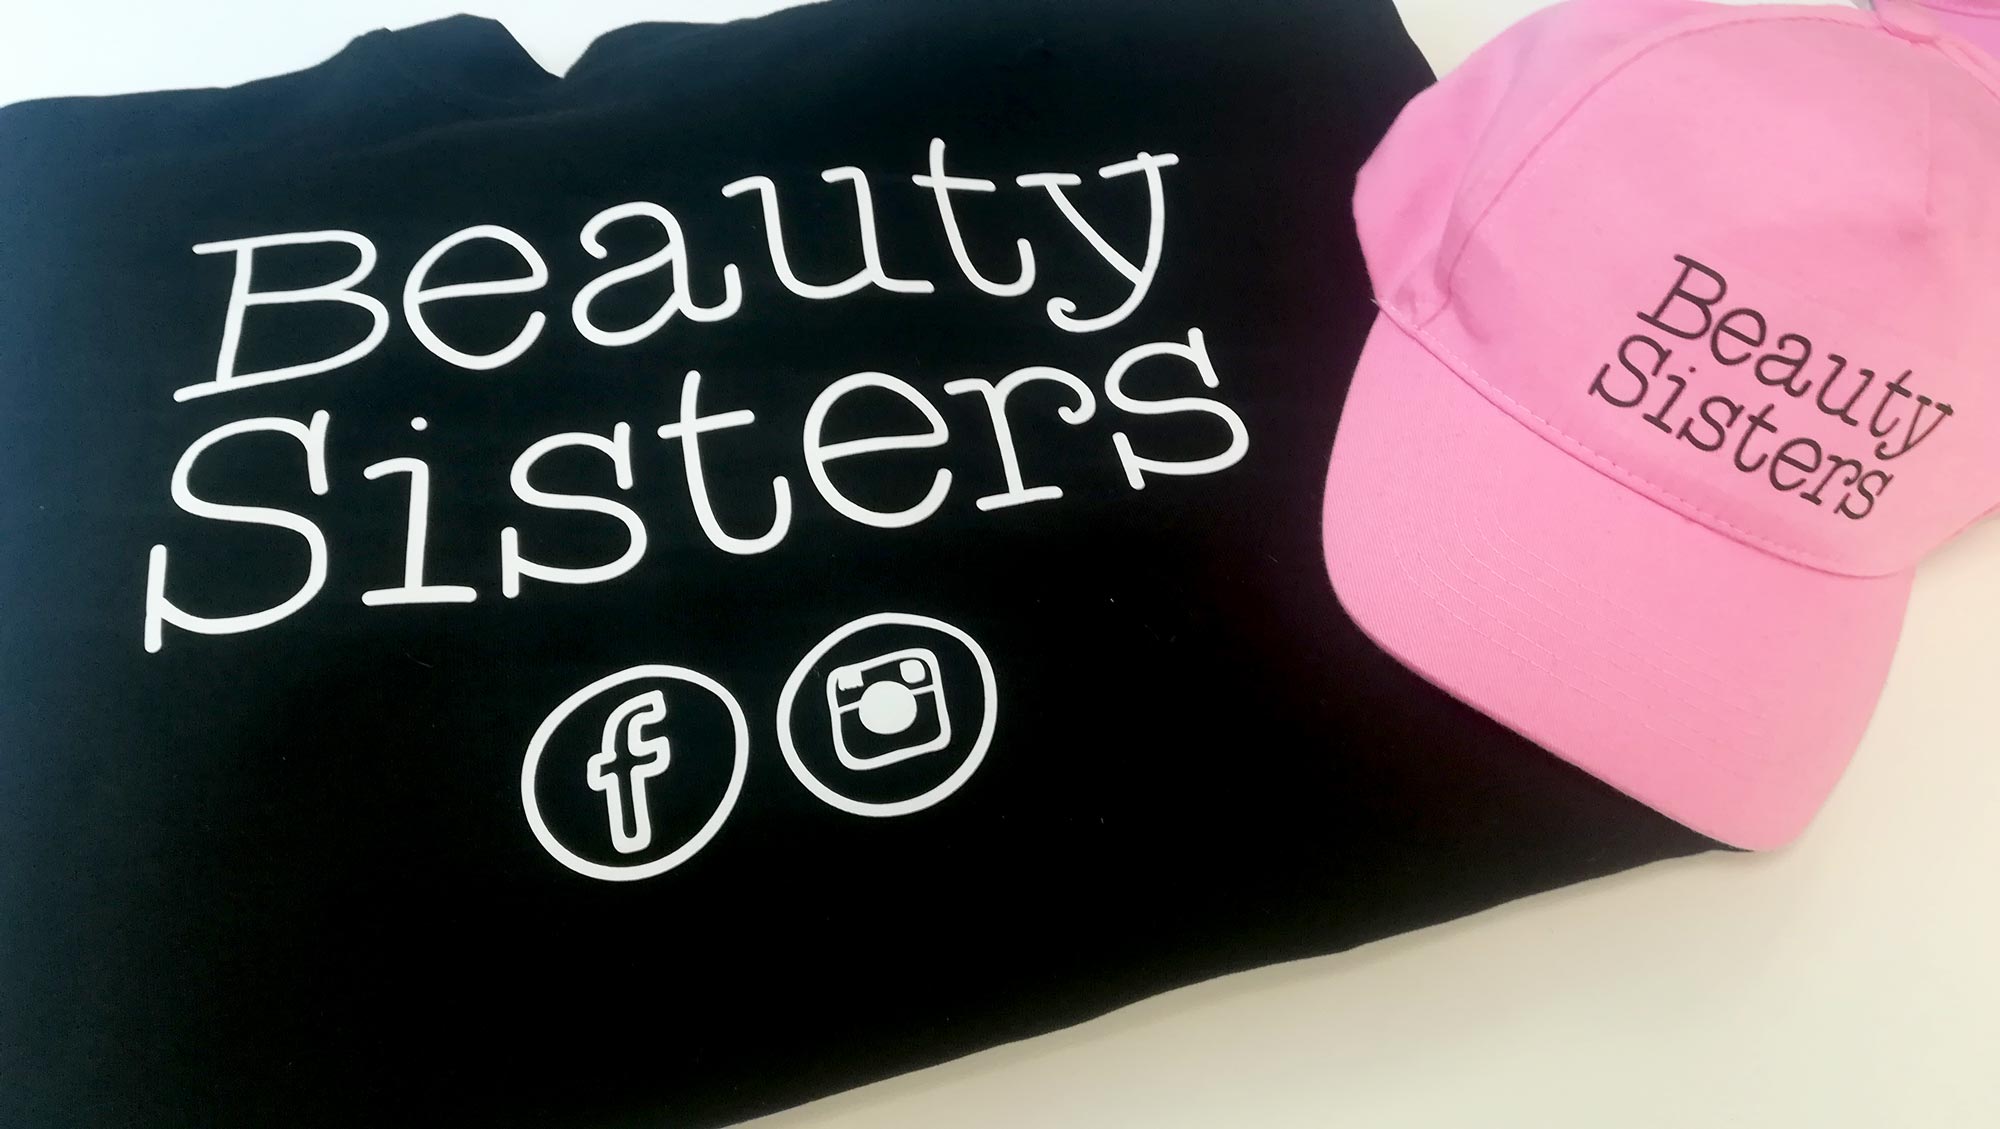 creation-operation-street-marketing-institut-de-beaute-beauty-sisters-perigueux